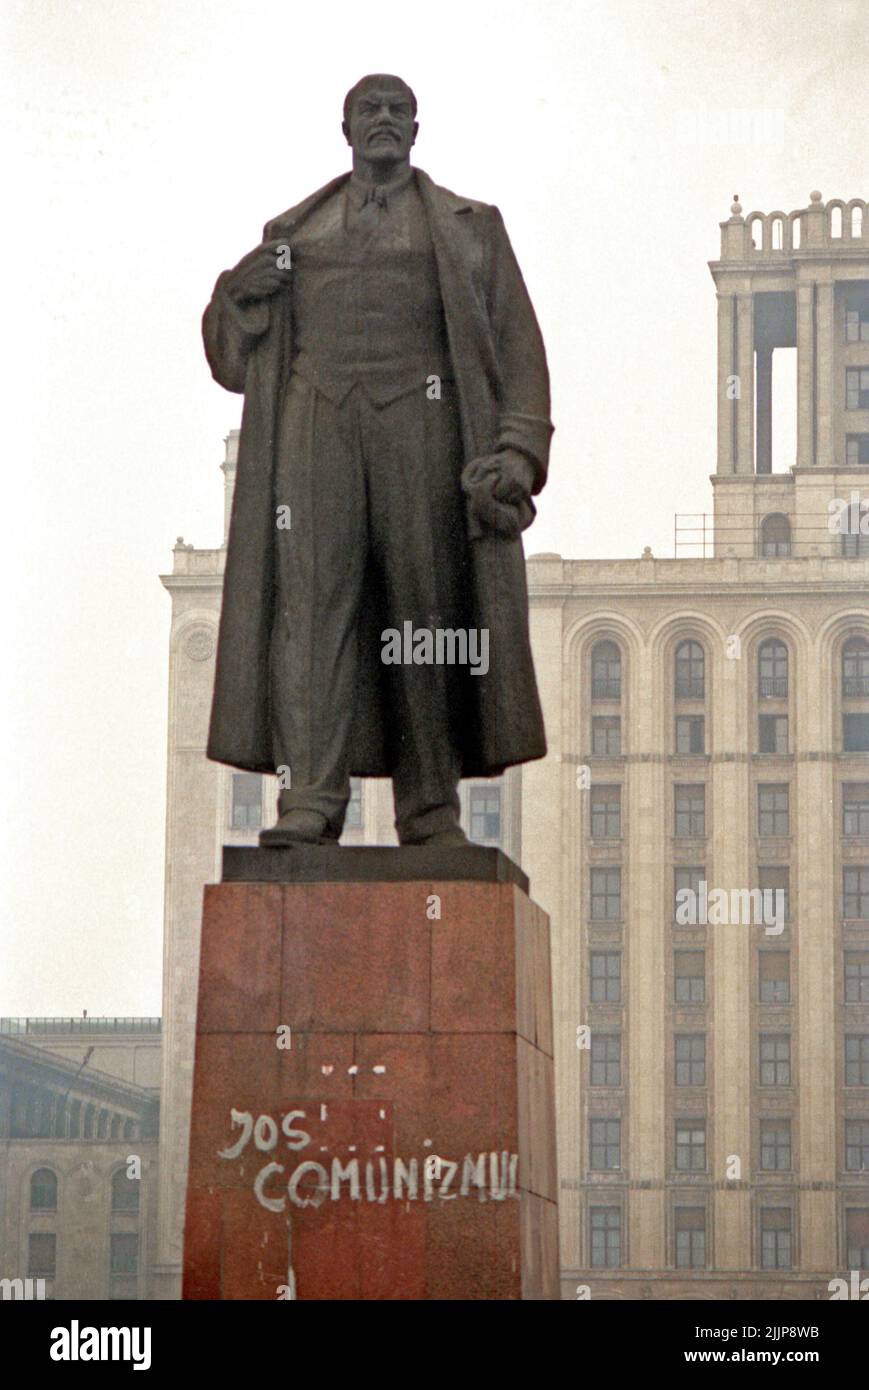 Bucharest, Romania, January 1990. On the pedestal of the statue of Lenin someone wrote 'Down with communism' in the days following the Romanian anticommunist revolution of December 1989, an unthinkable gesture before that time. The statue was standing in Piata Scanteii (The Spark Plazza ) since the 1960, and was eventually tore down in March 1990. Stock Photo